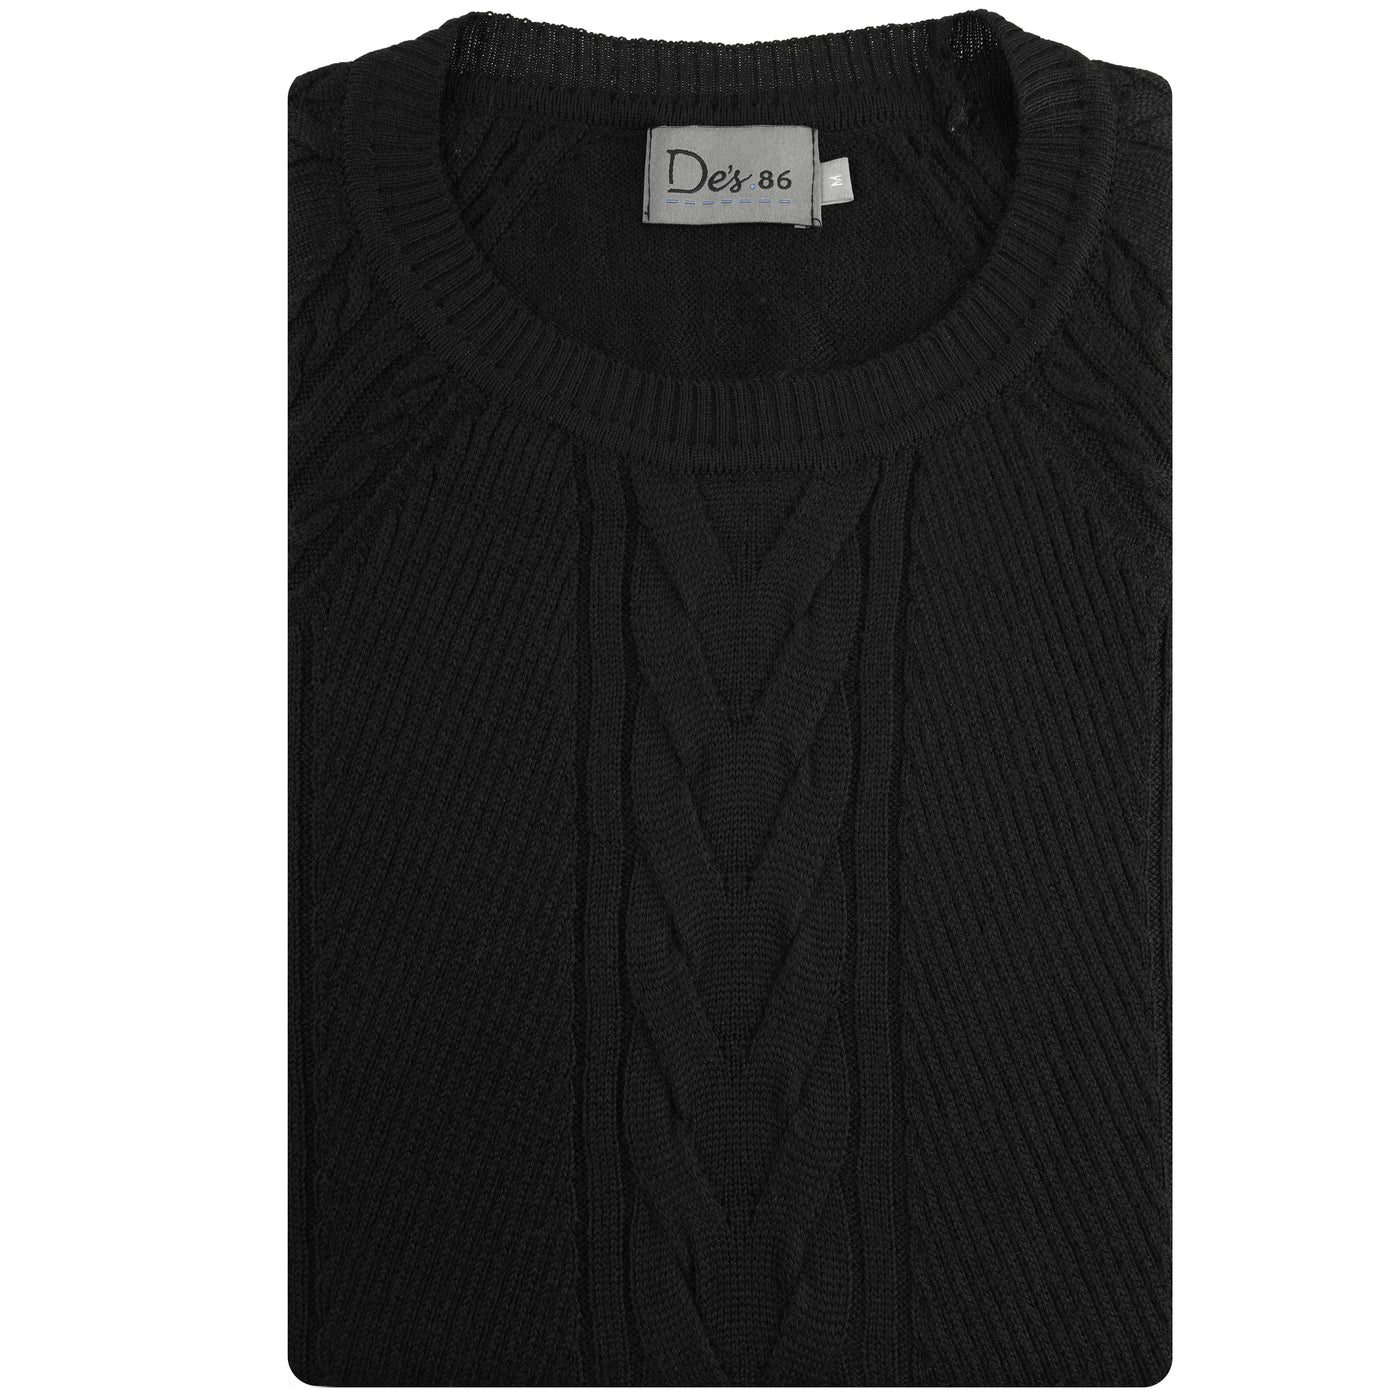 Jacquard Knitted Black Round Pullover